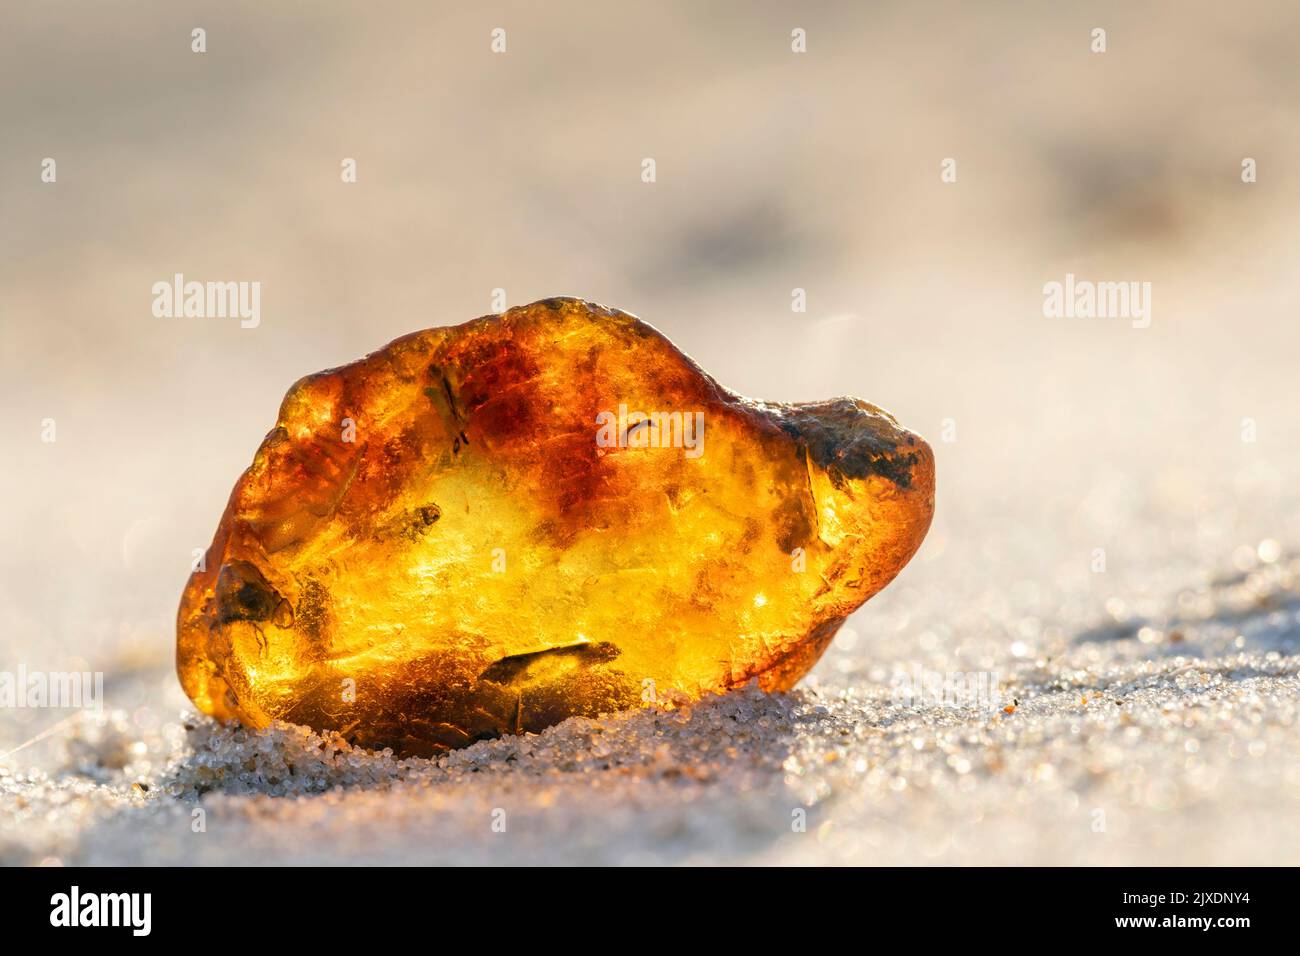 Amber with insect and plant material as inclusions among mussels. Denmark Stock Photo